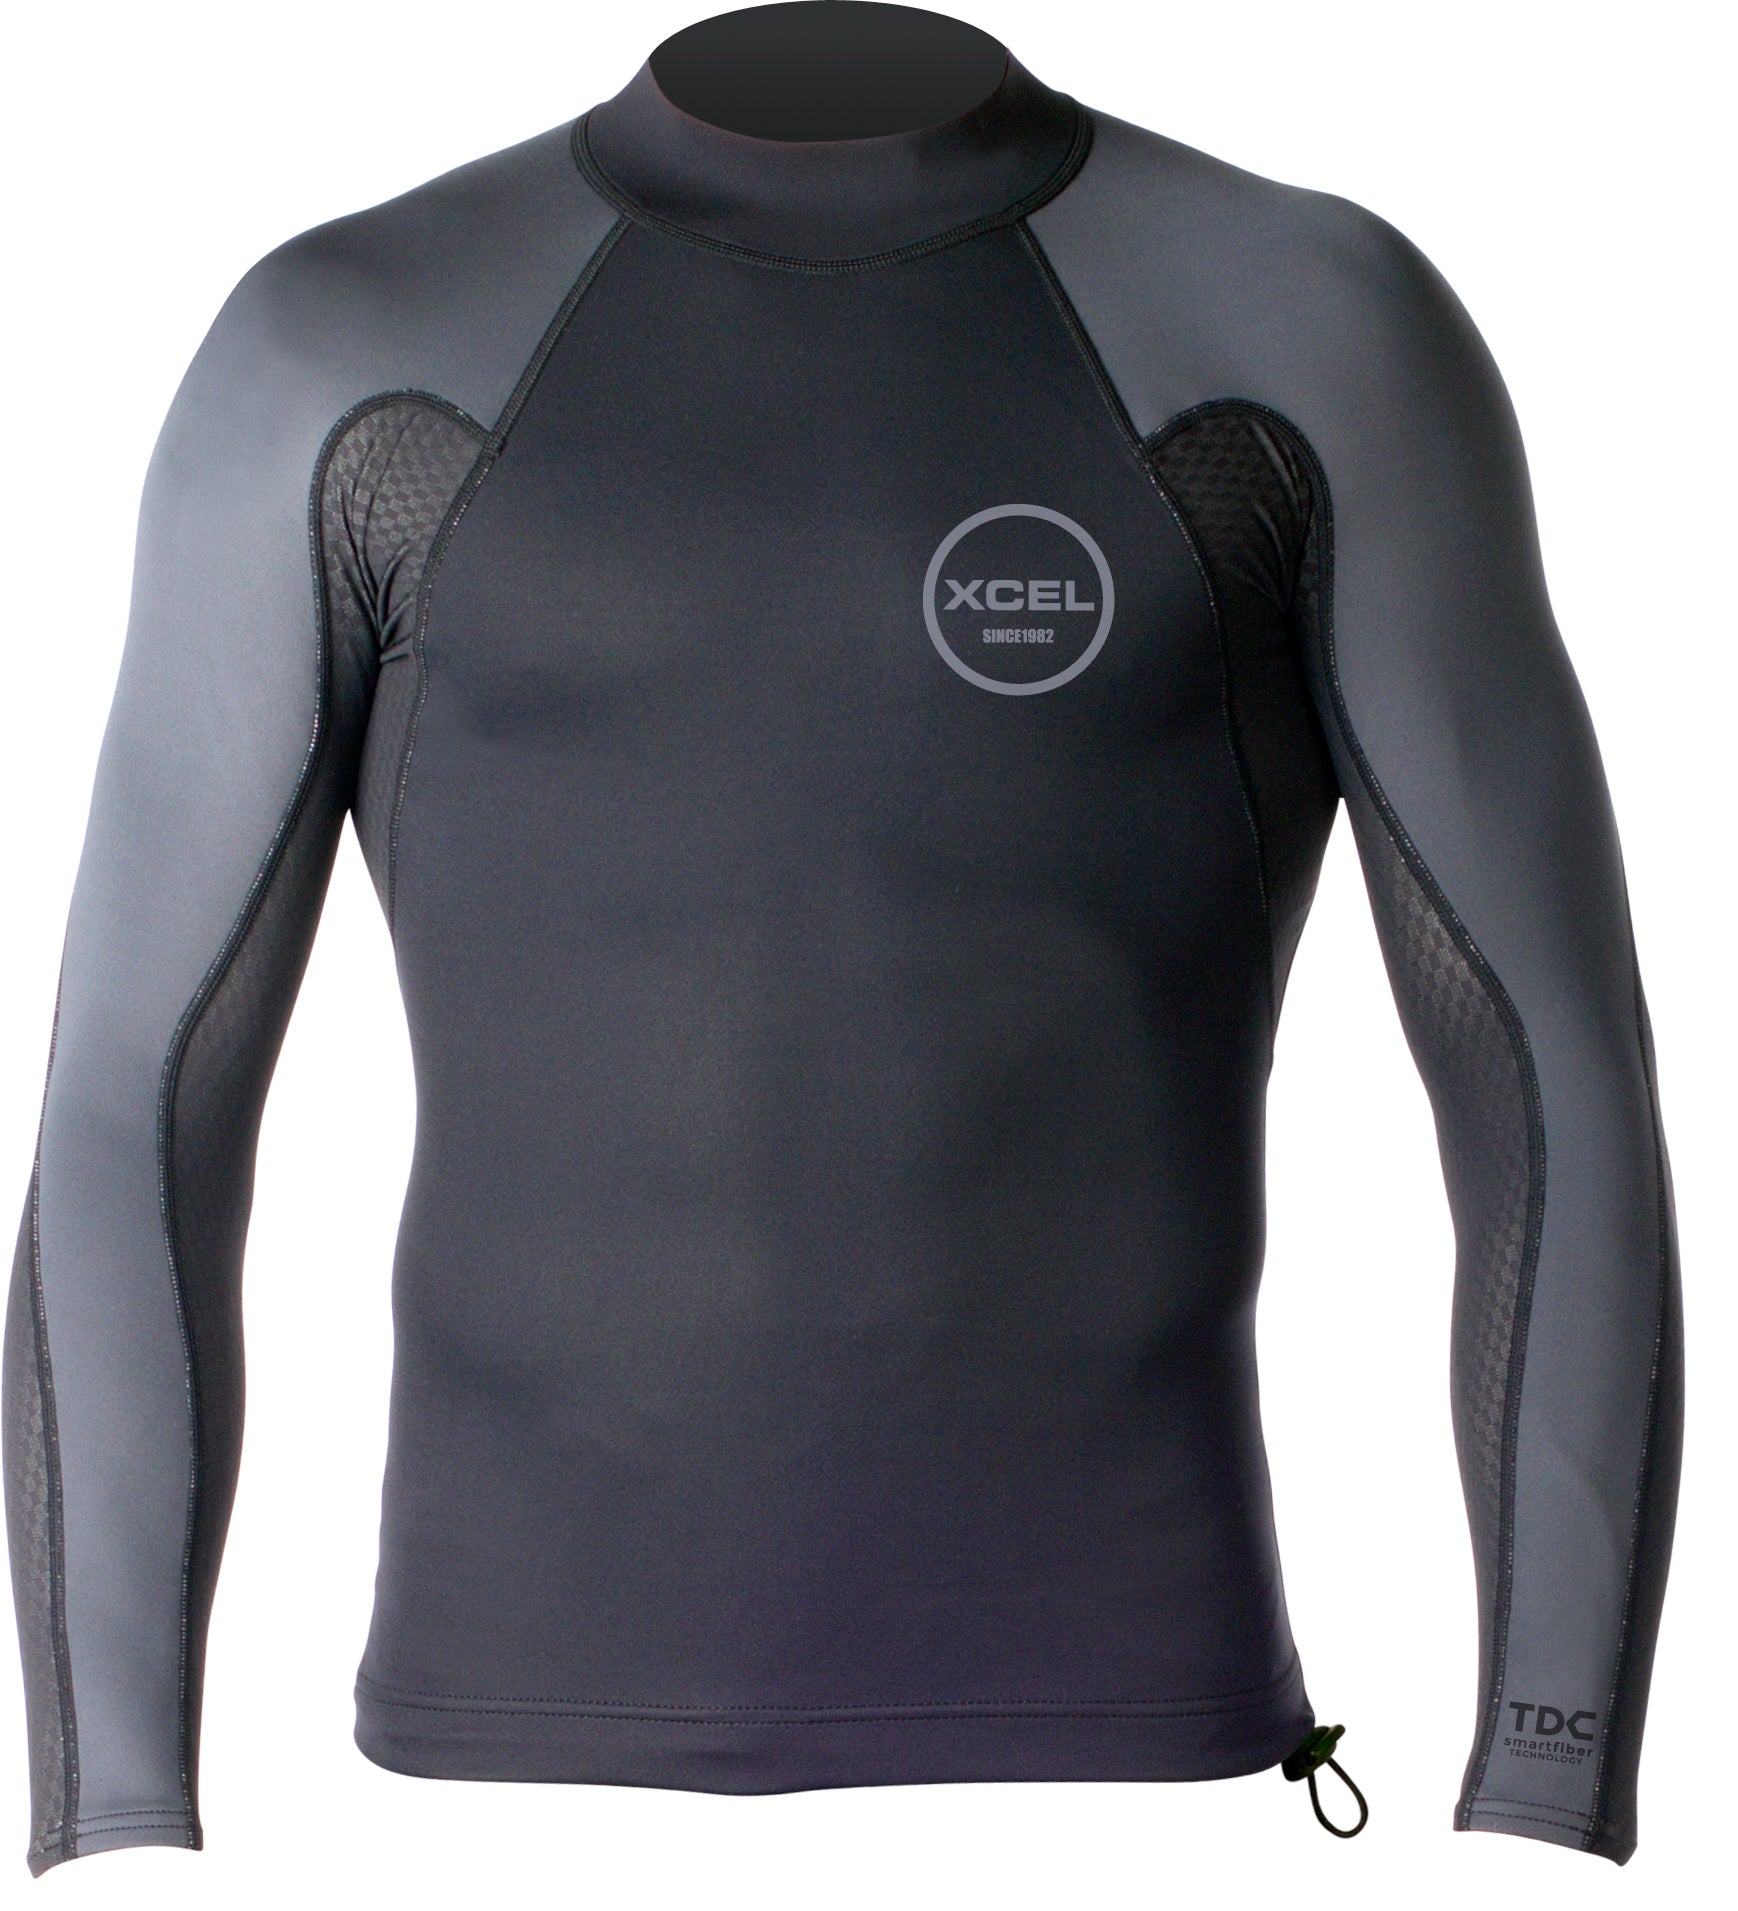 Xcel Axis Neostretch 1.0/1.5mm L/S Wetsuit Jacket